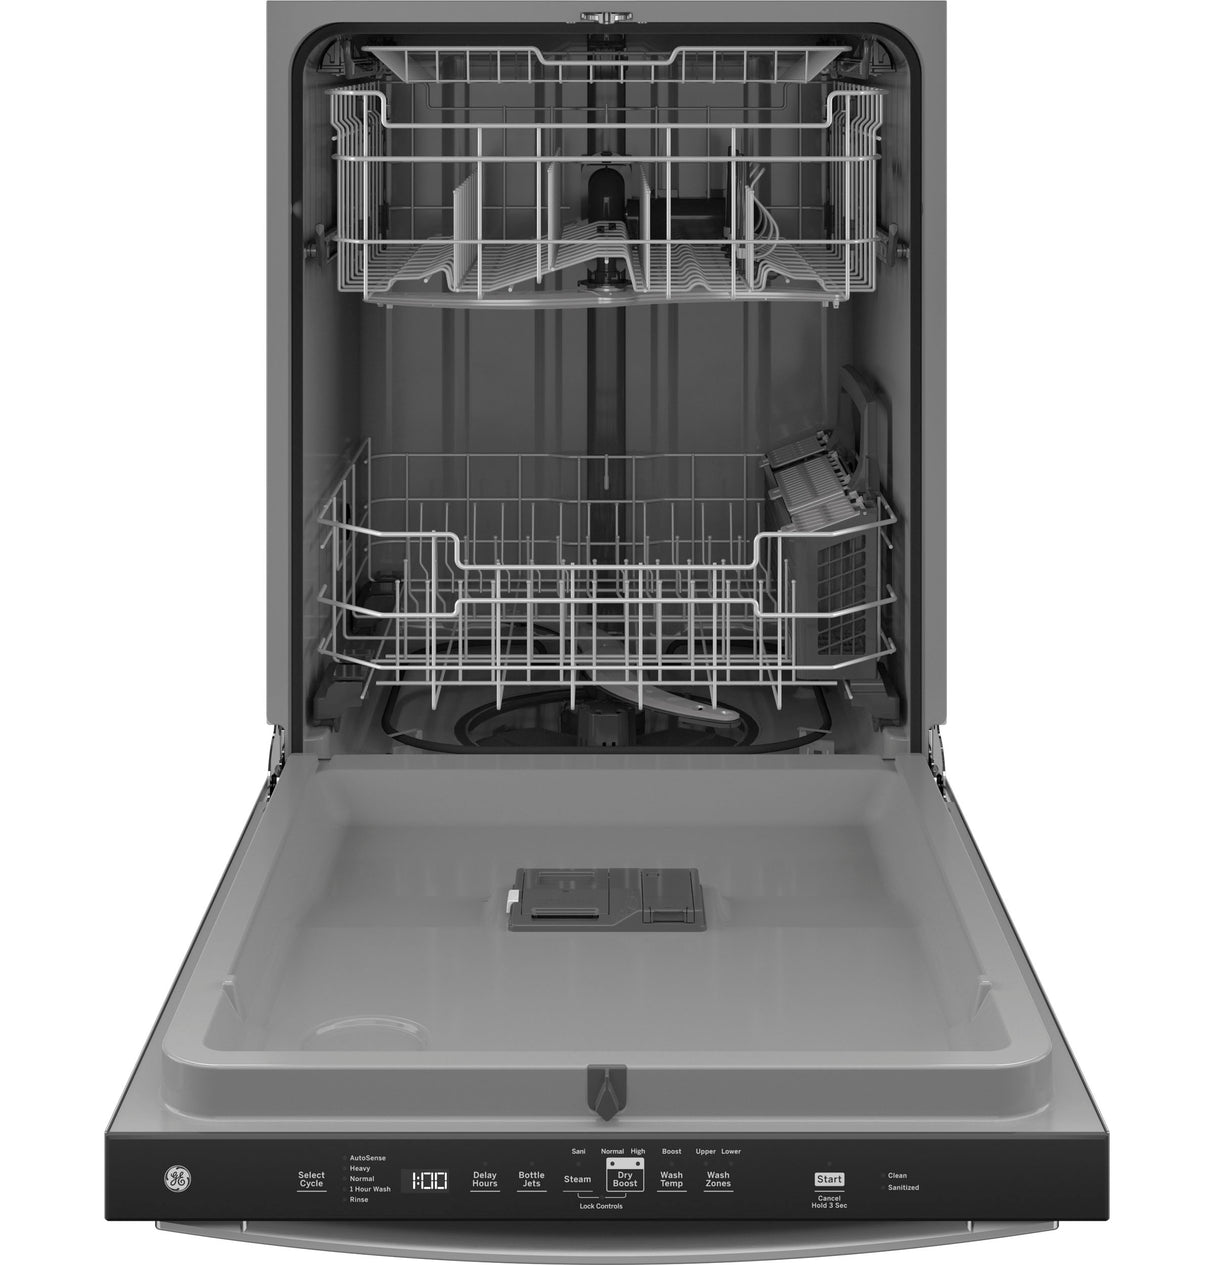 GE(R) ENERGY STAR(R) Top Control with Plastic Interior Dishwasher with Sanitize Cycle & Dry Boost - (GDT630PYRFS)